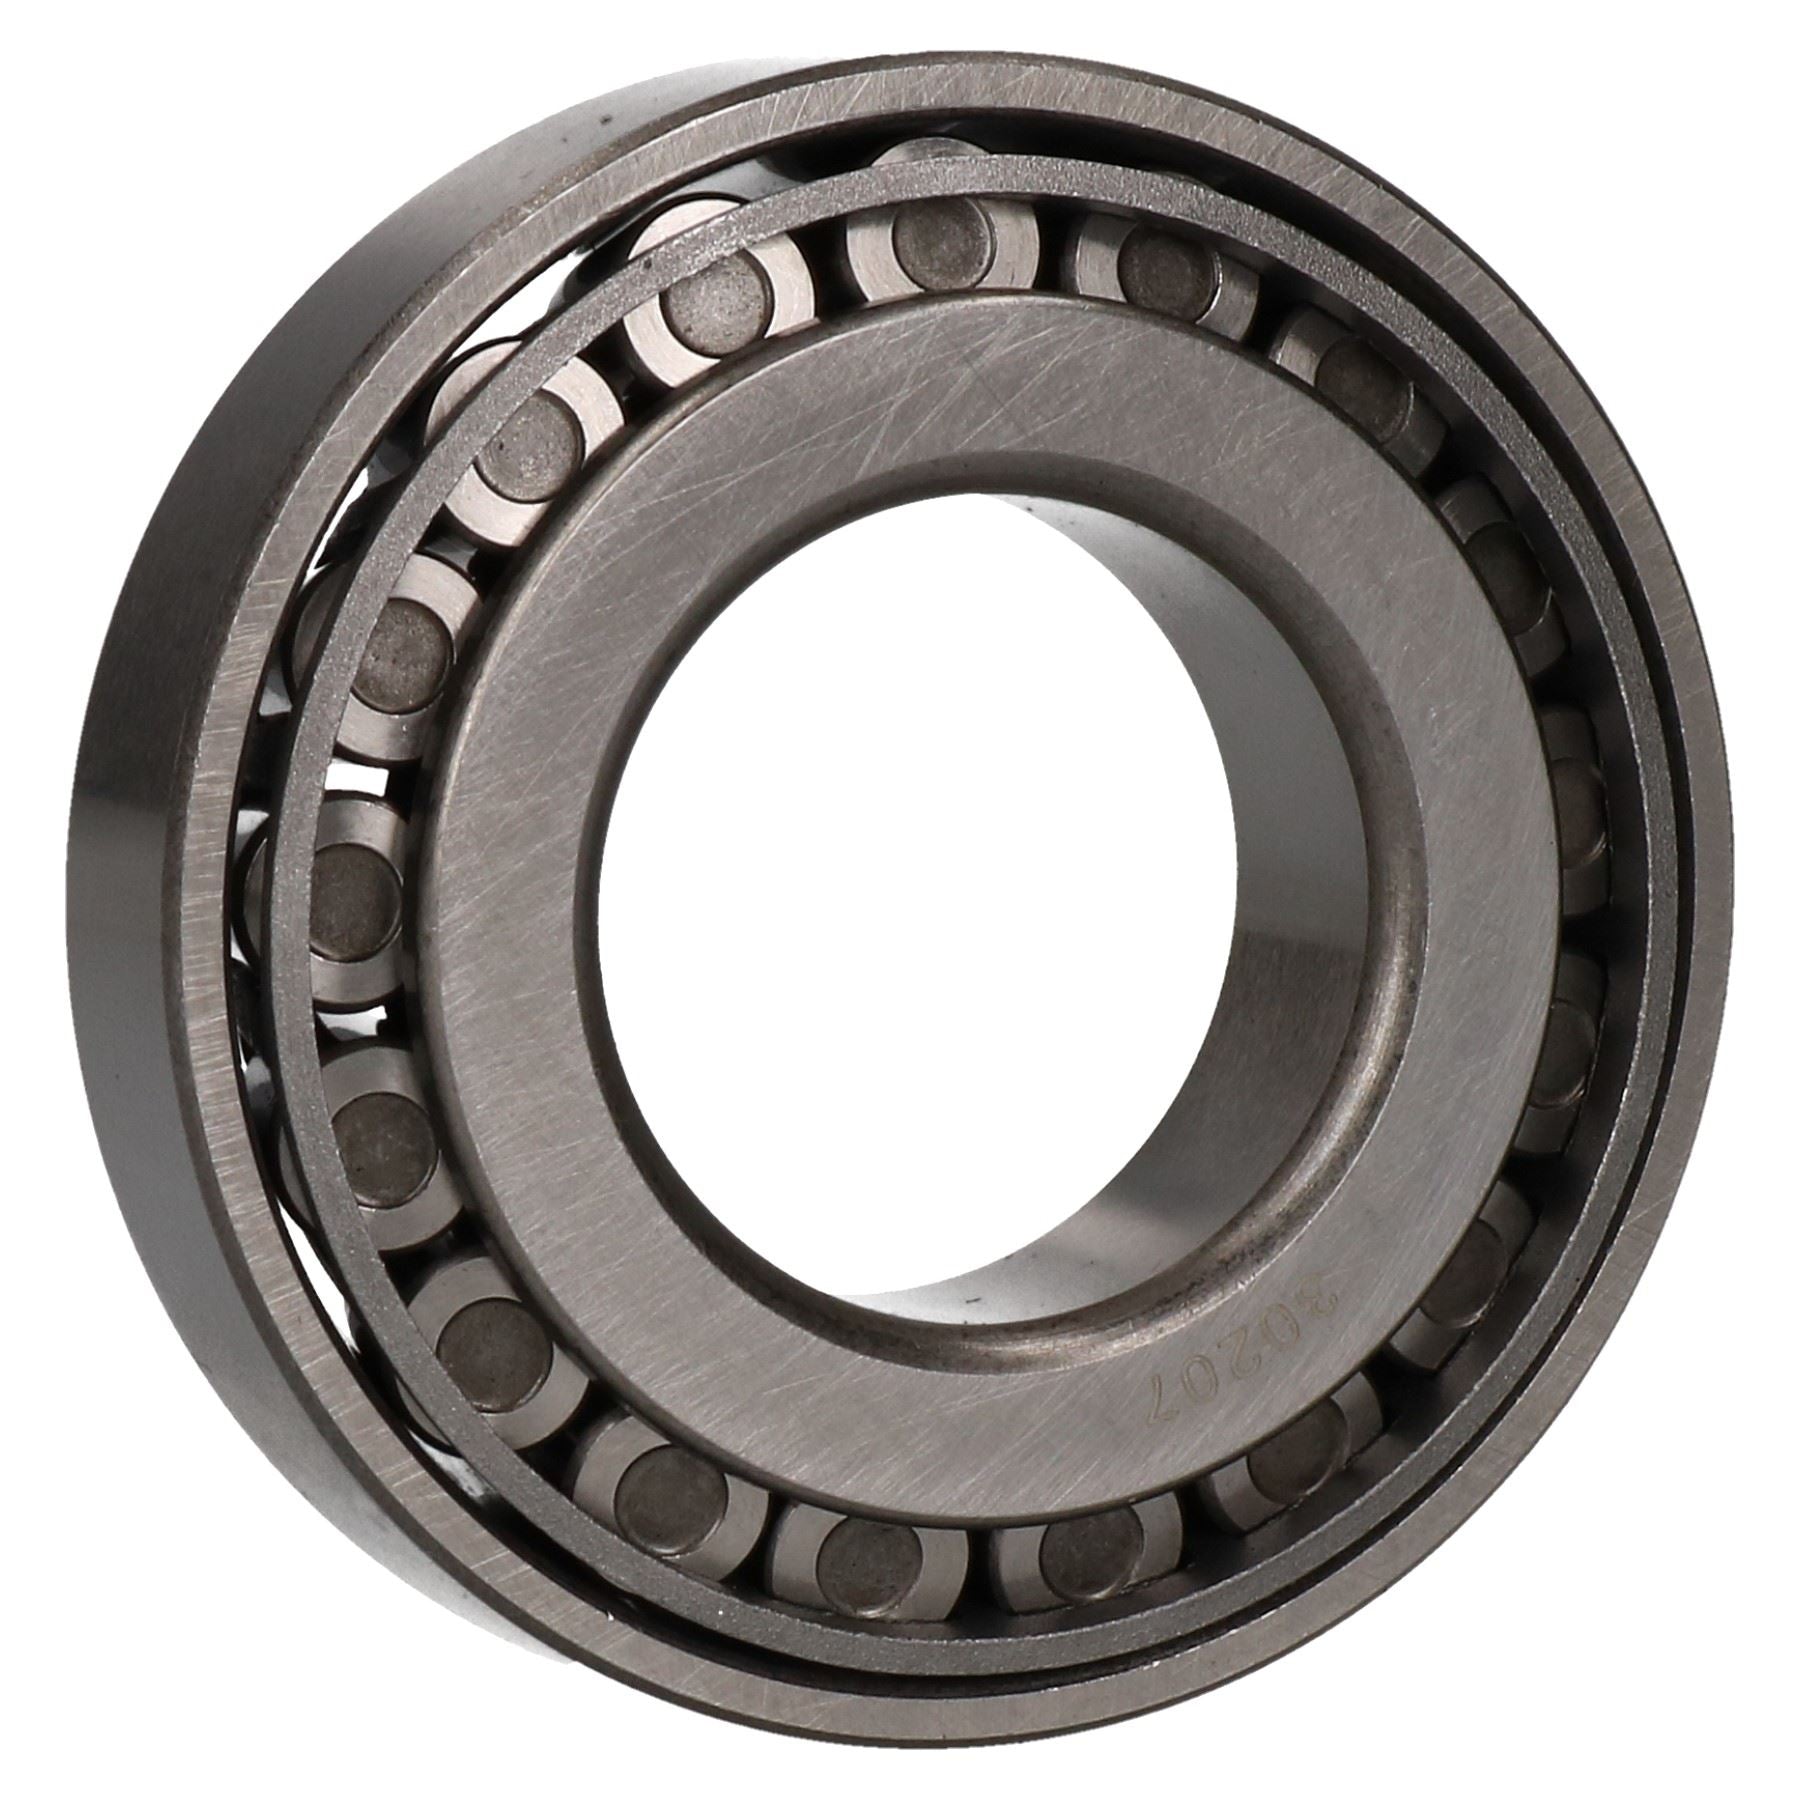 Trailer Tapered Taper Roller Bearing and Racer 30207 35mm x 75mm x 18.25mm